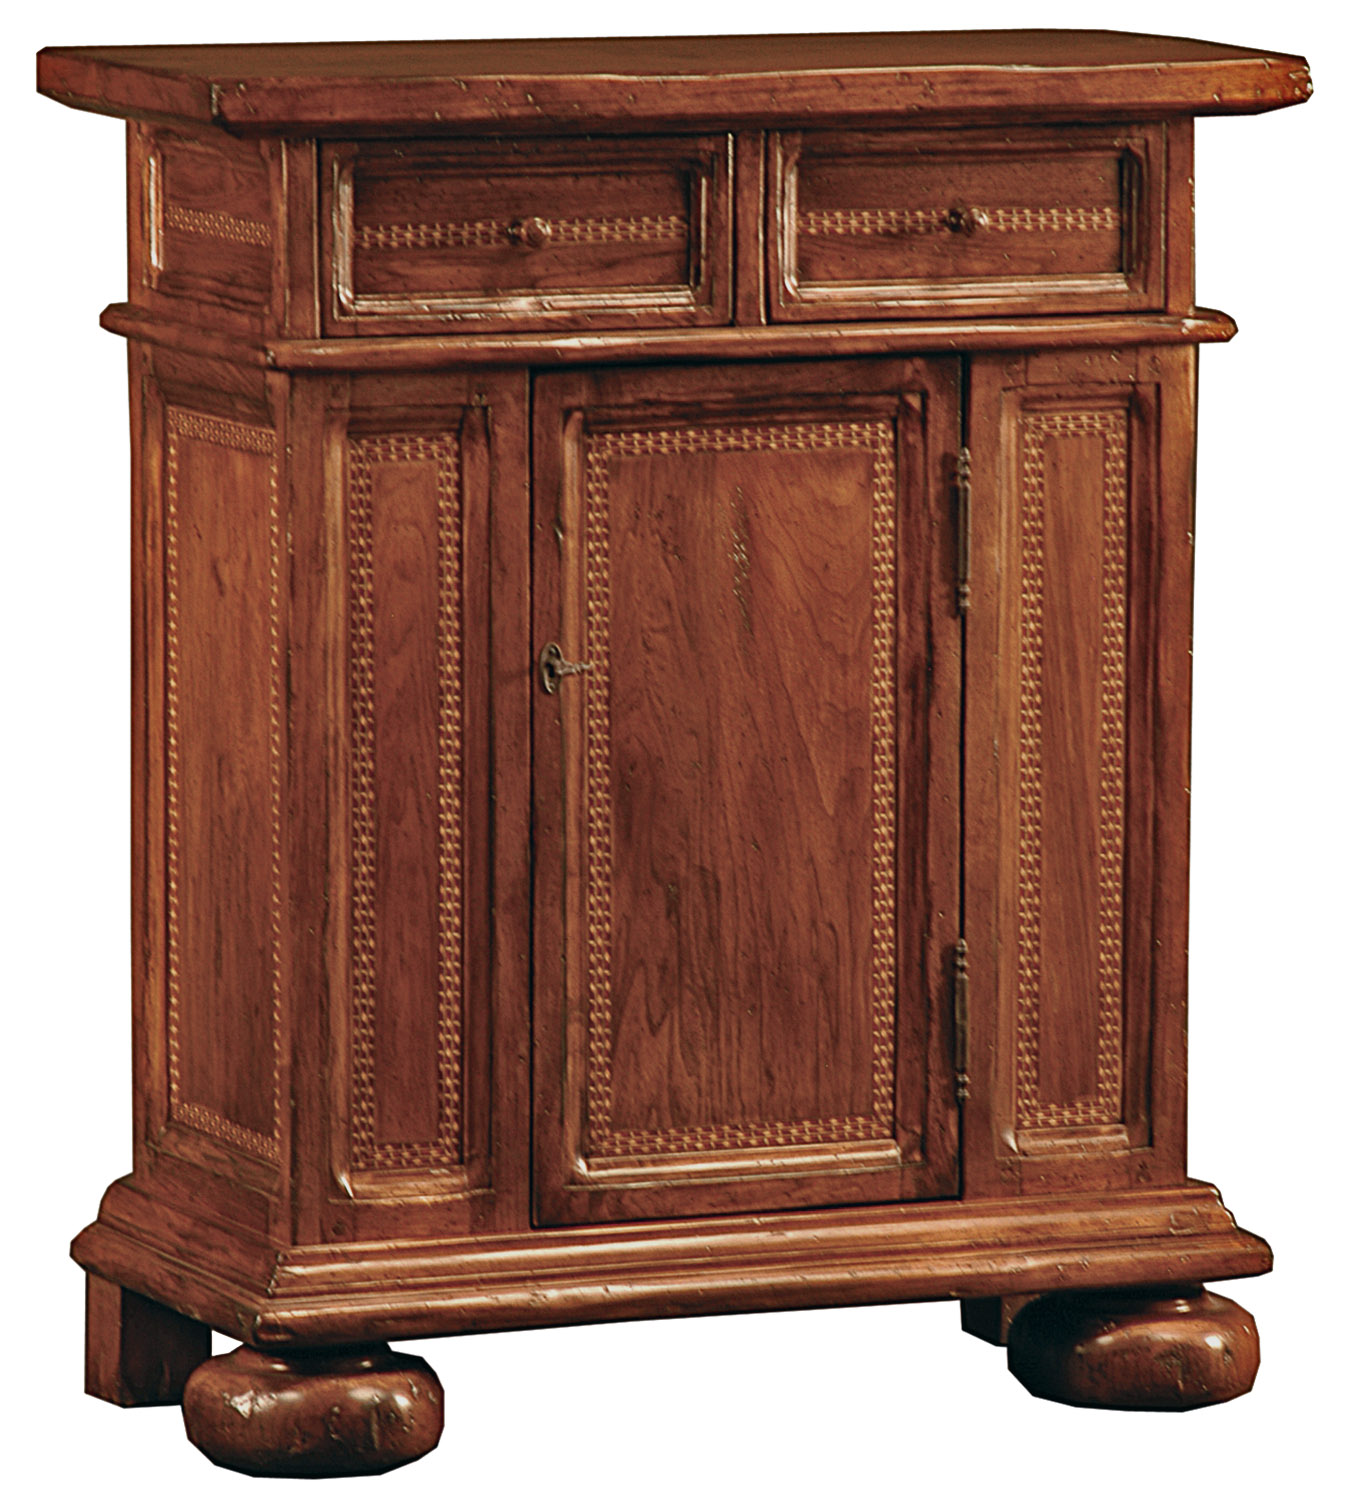 Lucera chest with marquetry inlay by Woodland furniture in Idaho Falls